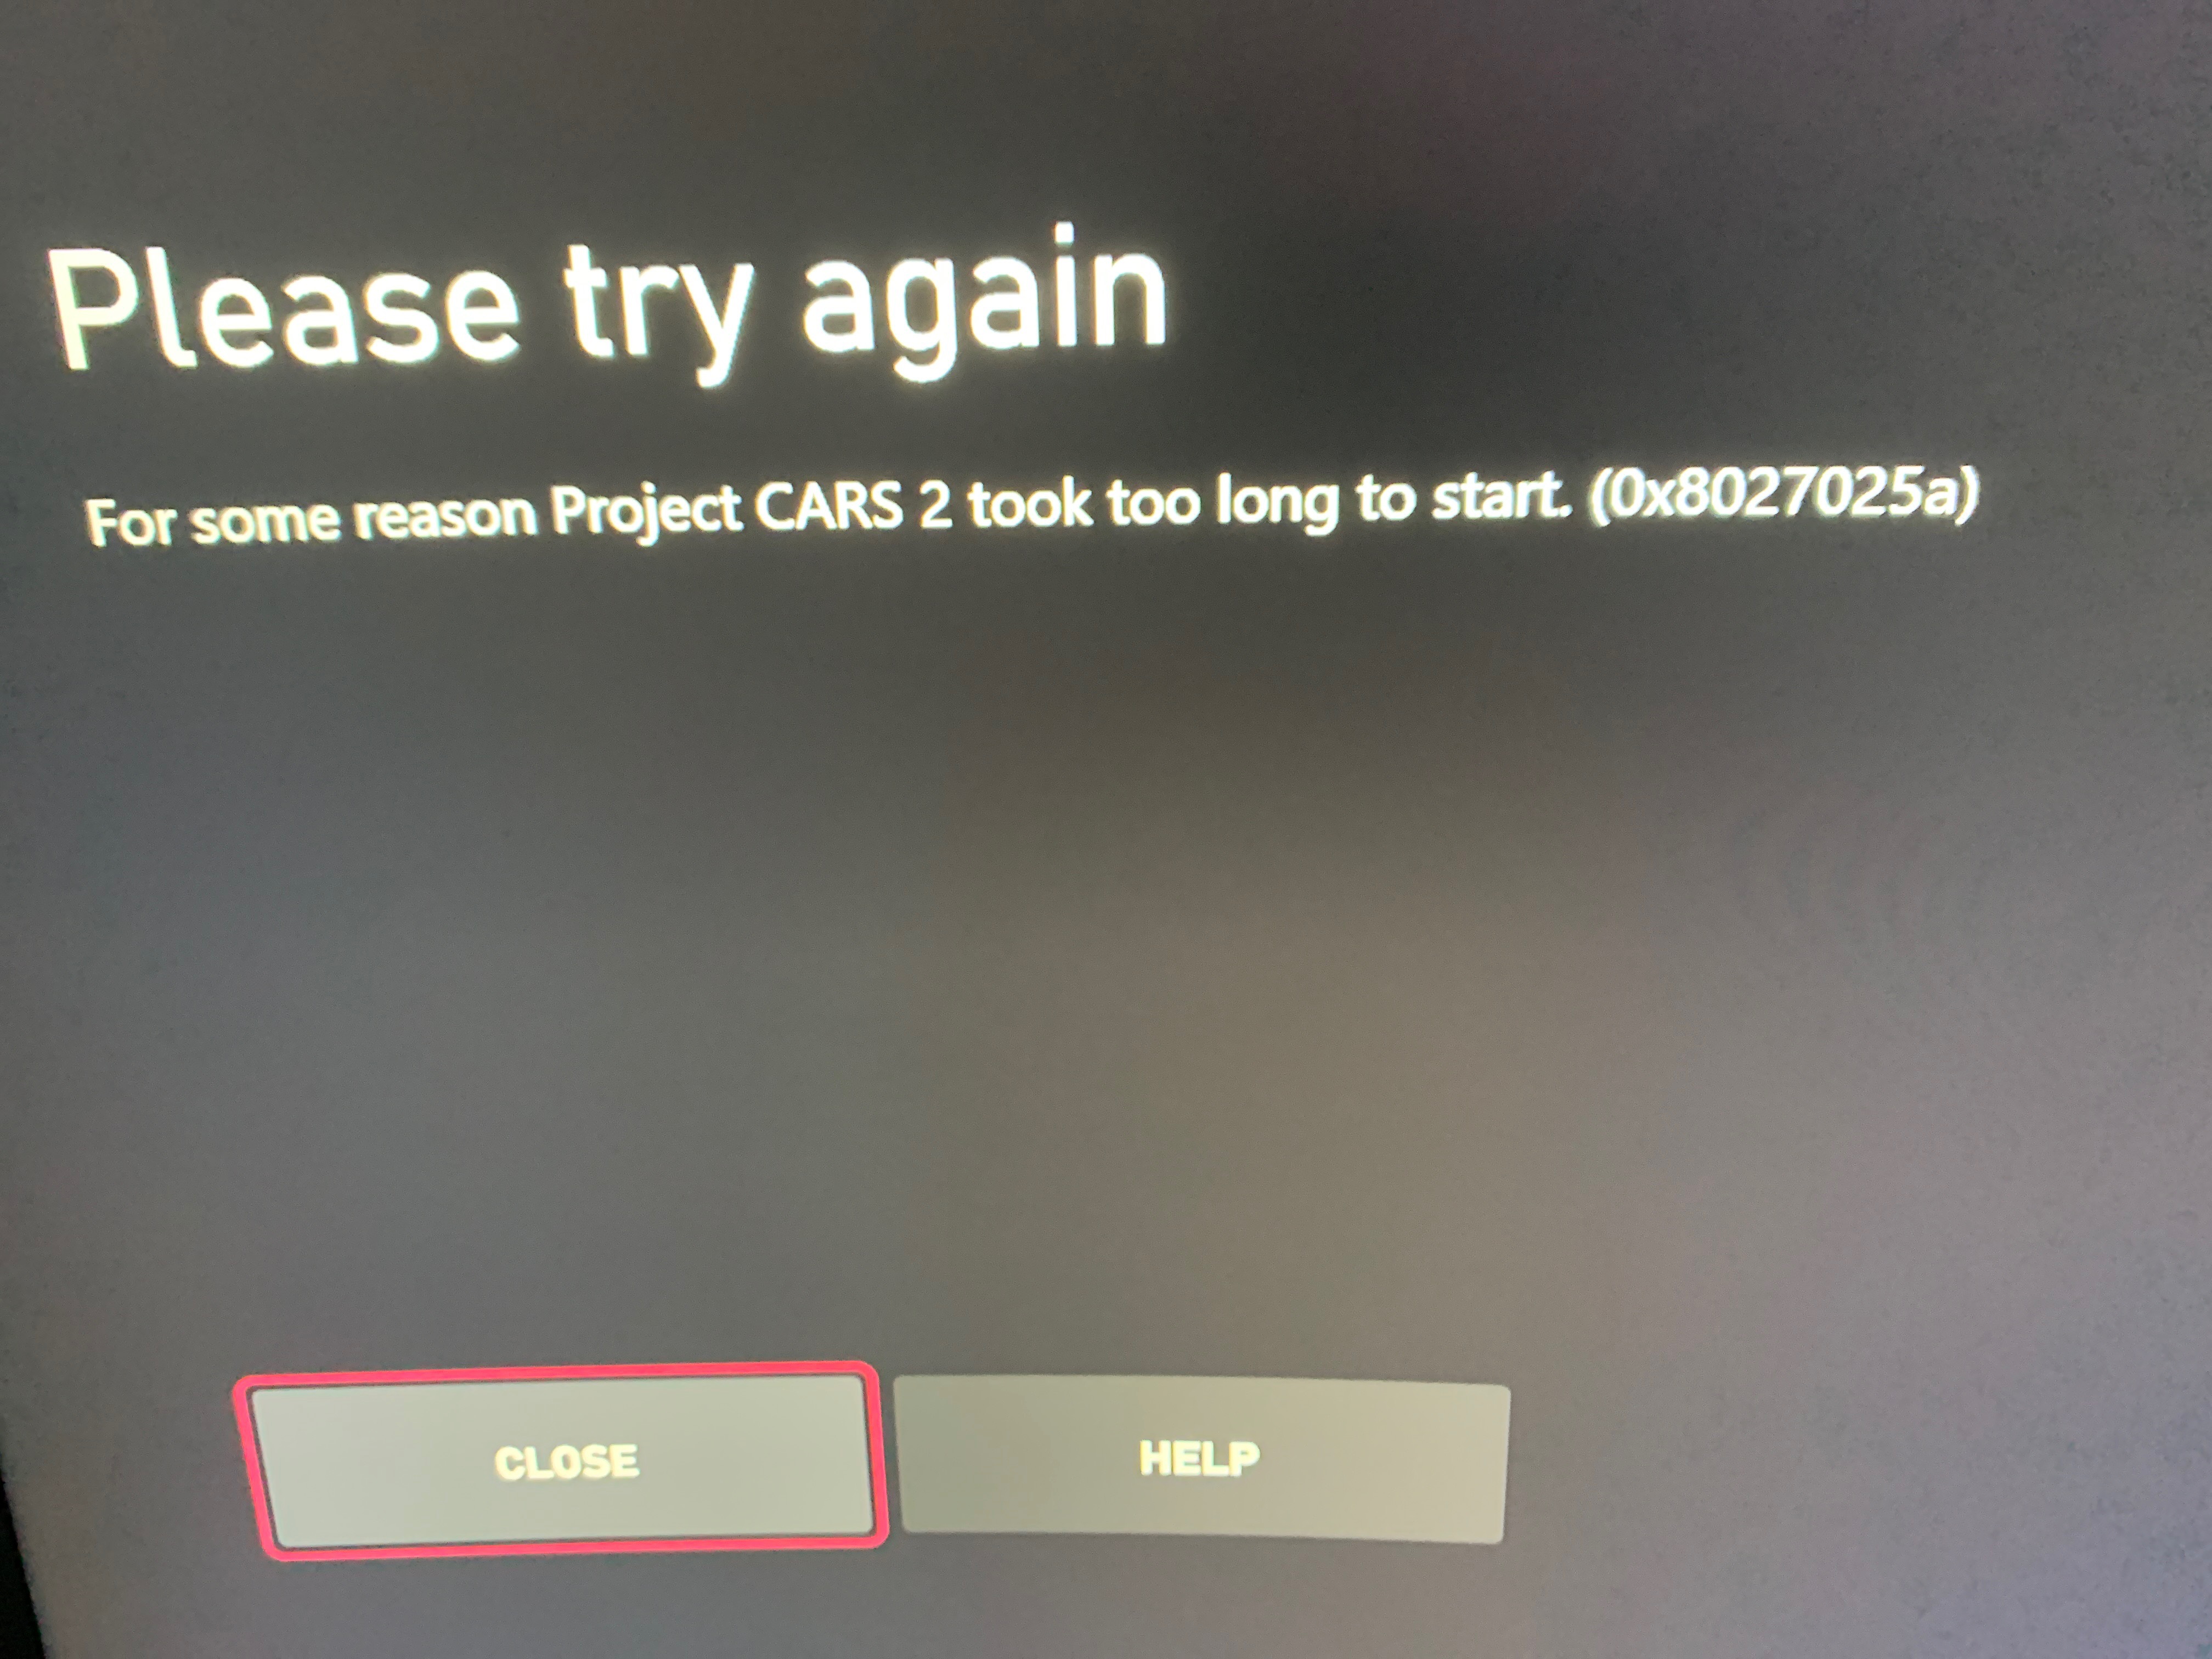 Why is this happening? - Microsoft Community